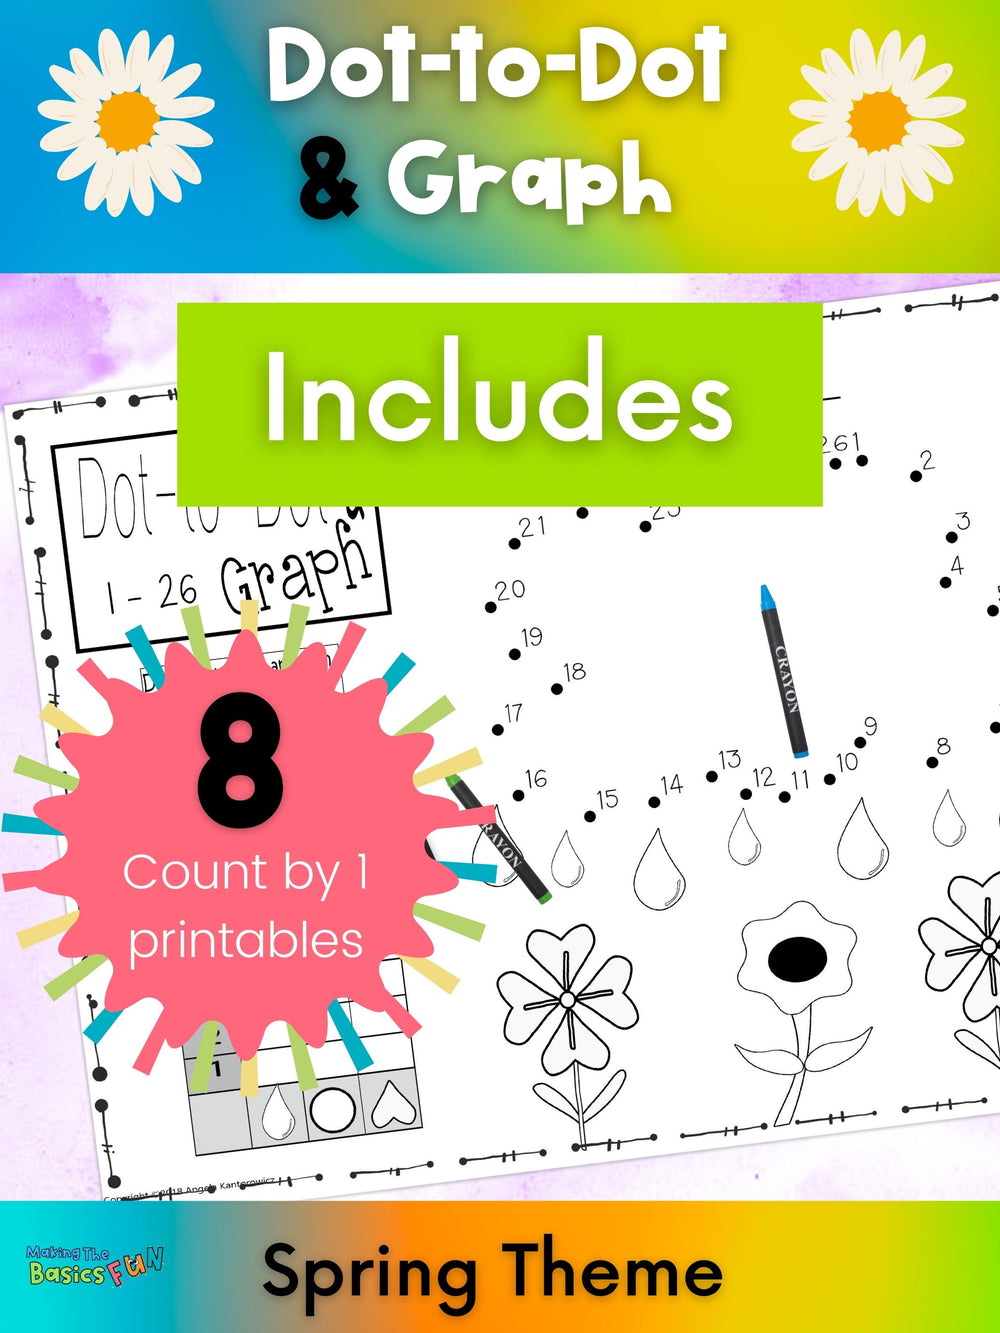 8 Dot-to-dot & graph spring puzzles are included in this set. One of them is shown as a cloud dot-to-dot with flowers and raindrops.